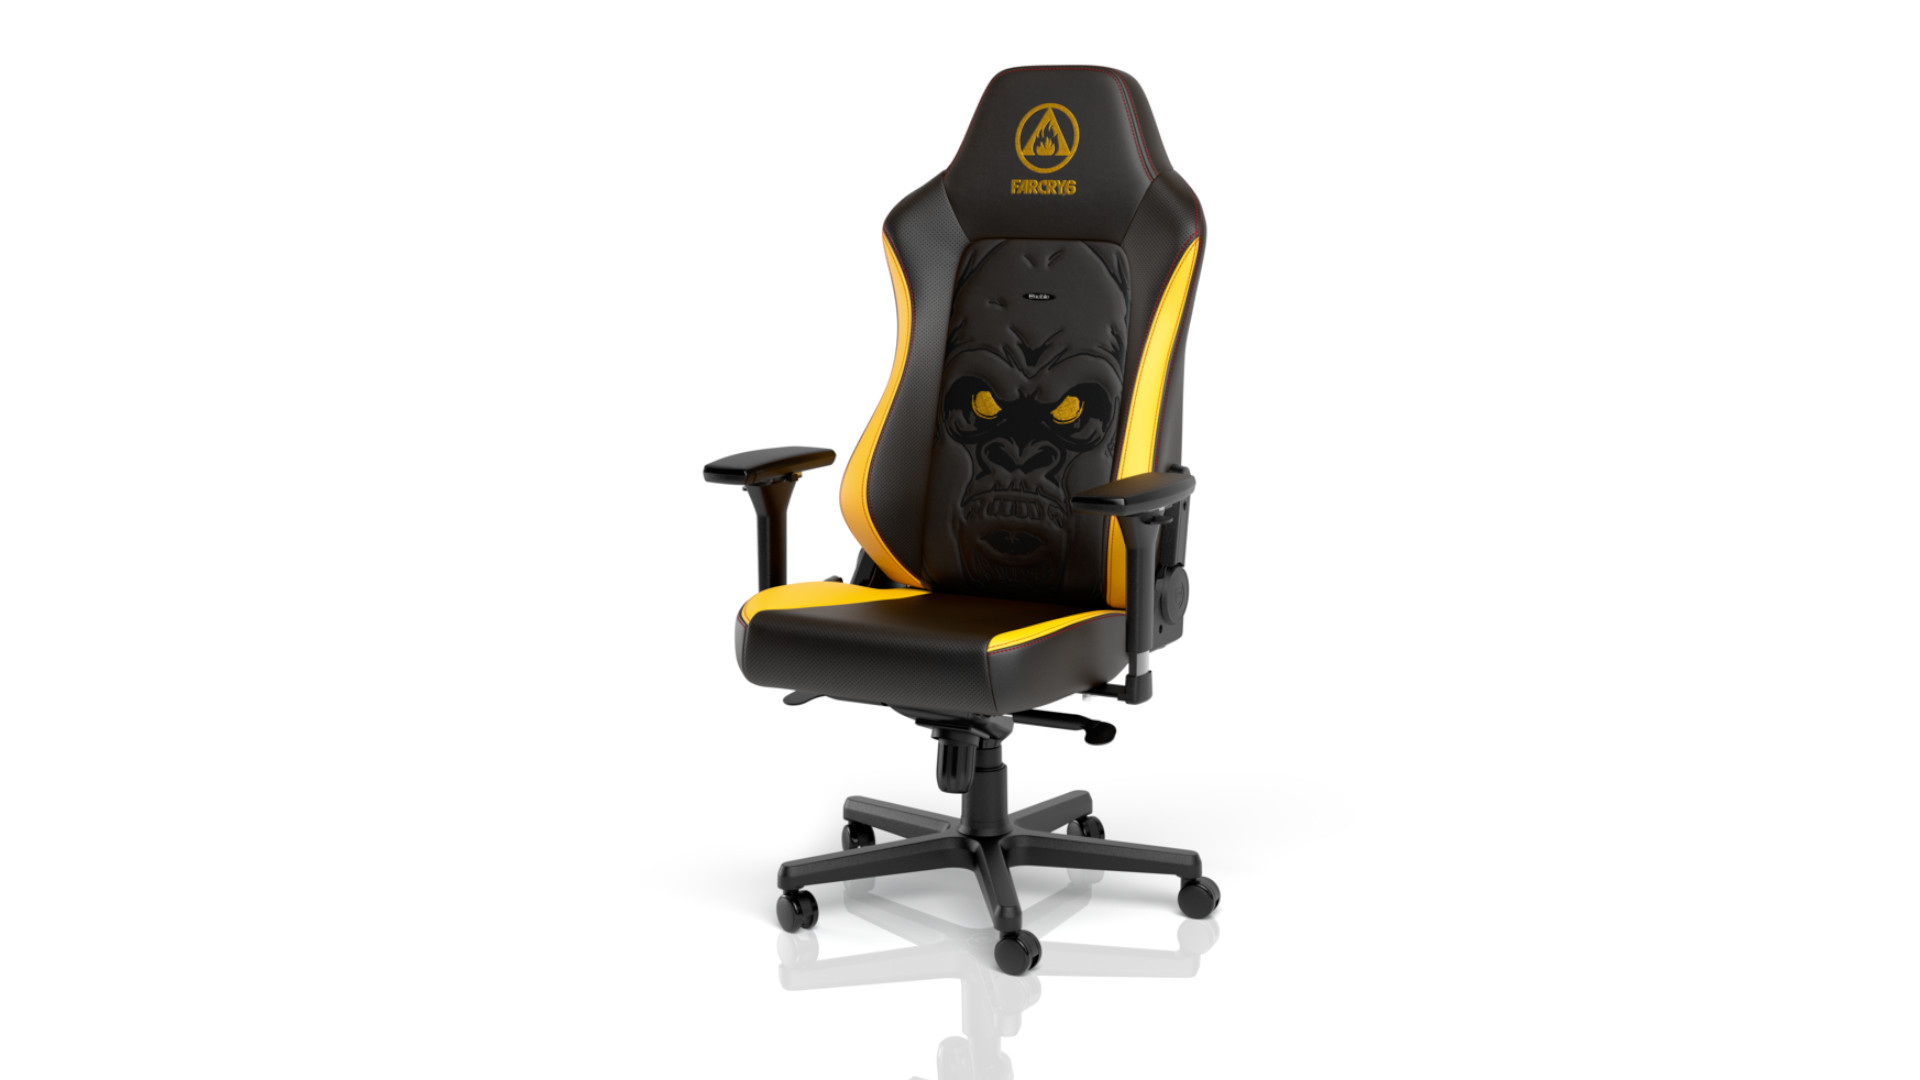 https://thebusinessofesports.com/wp-content/uploads/2021/10/far-cry-6-noblechairs-gaming-chair.jpg